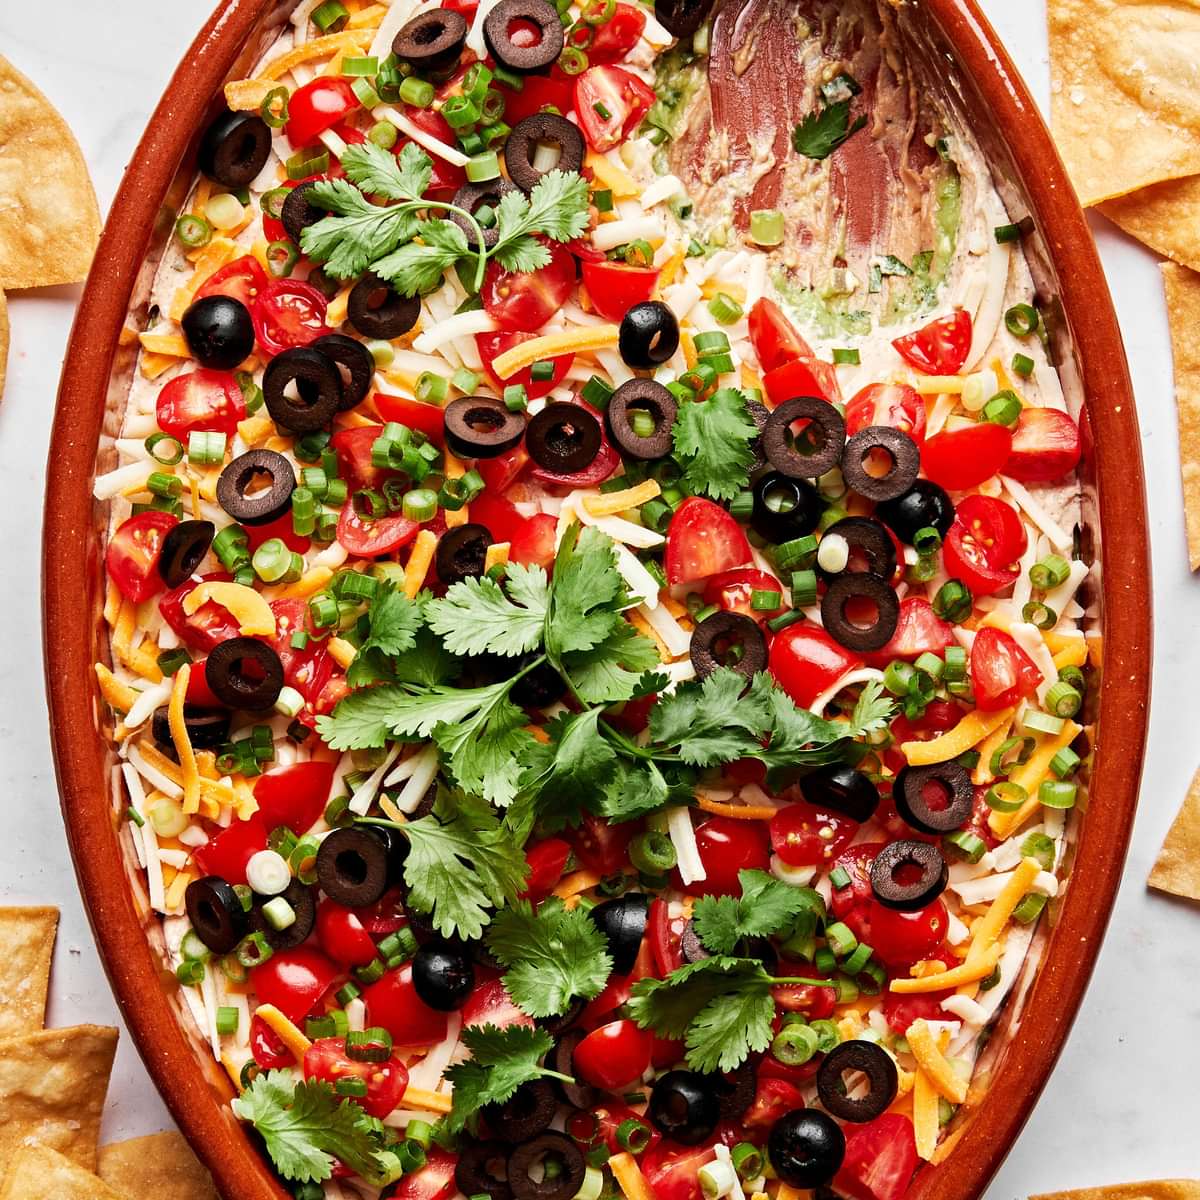 seven layer dip made with guacamole, refried beans, shredded cheese, sour cream, tomatoes, olives, green onion and cilantro